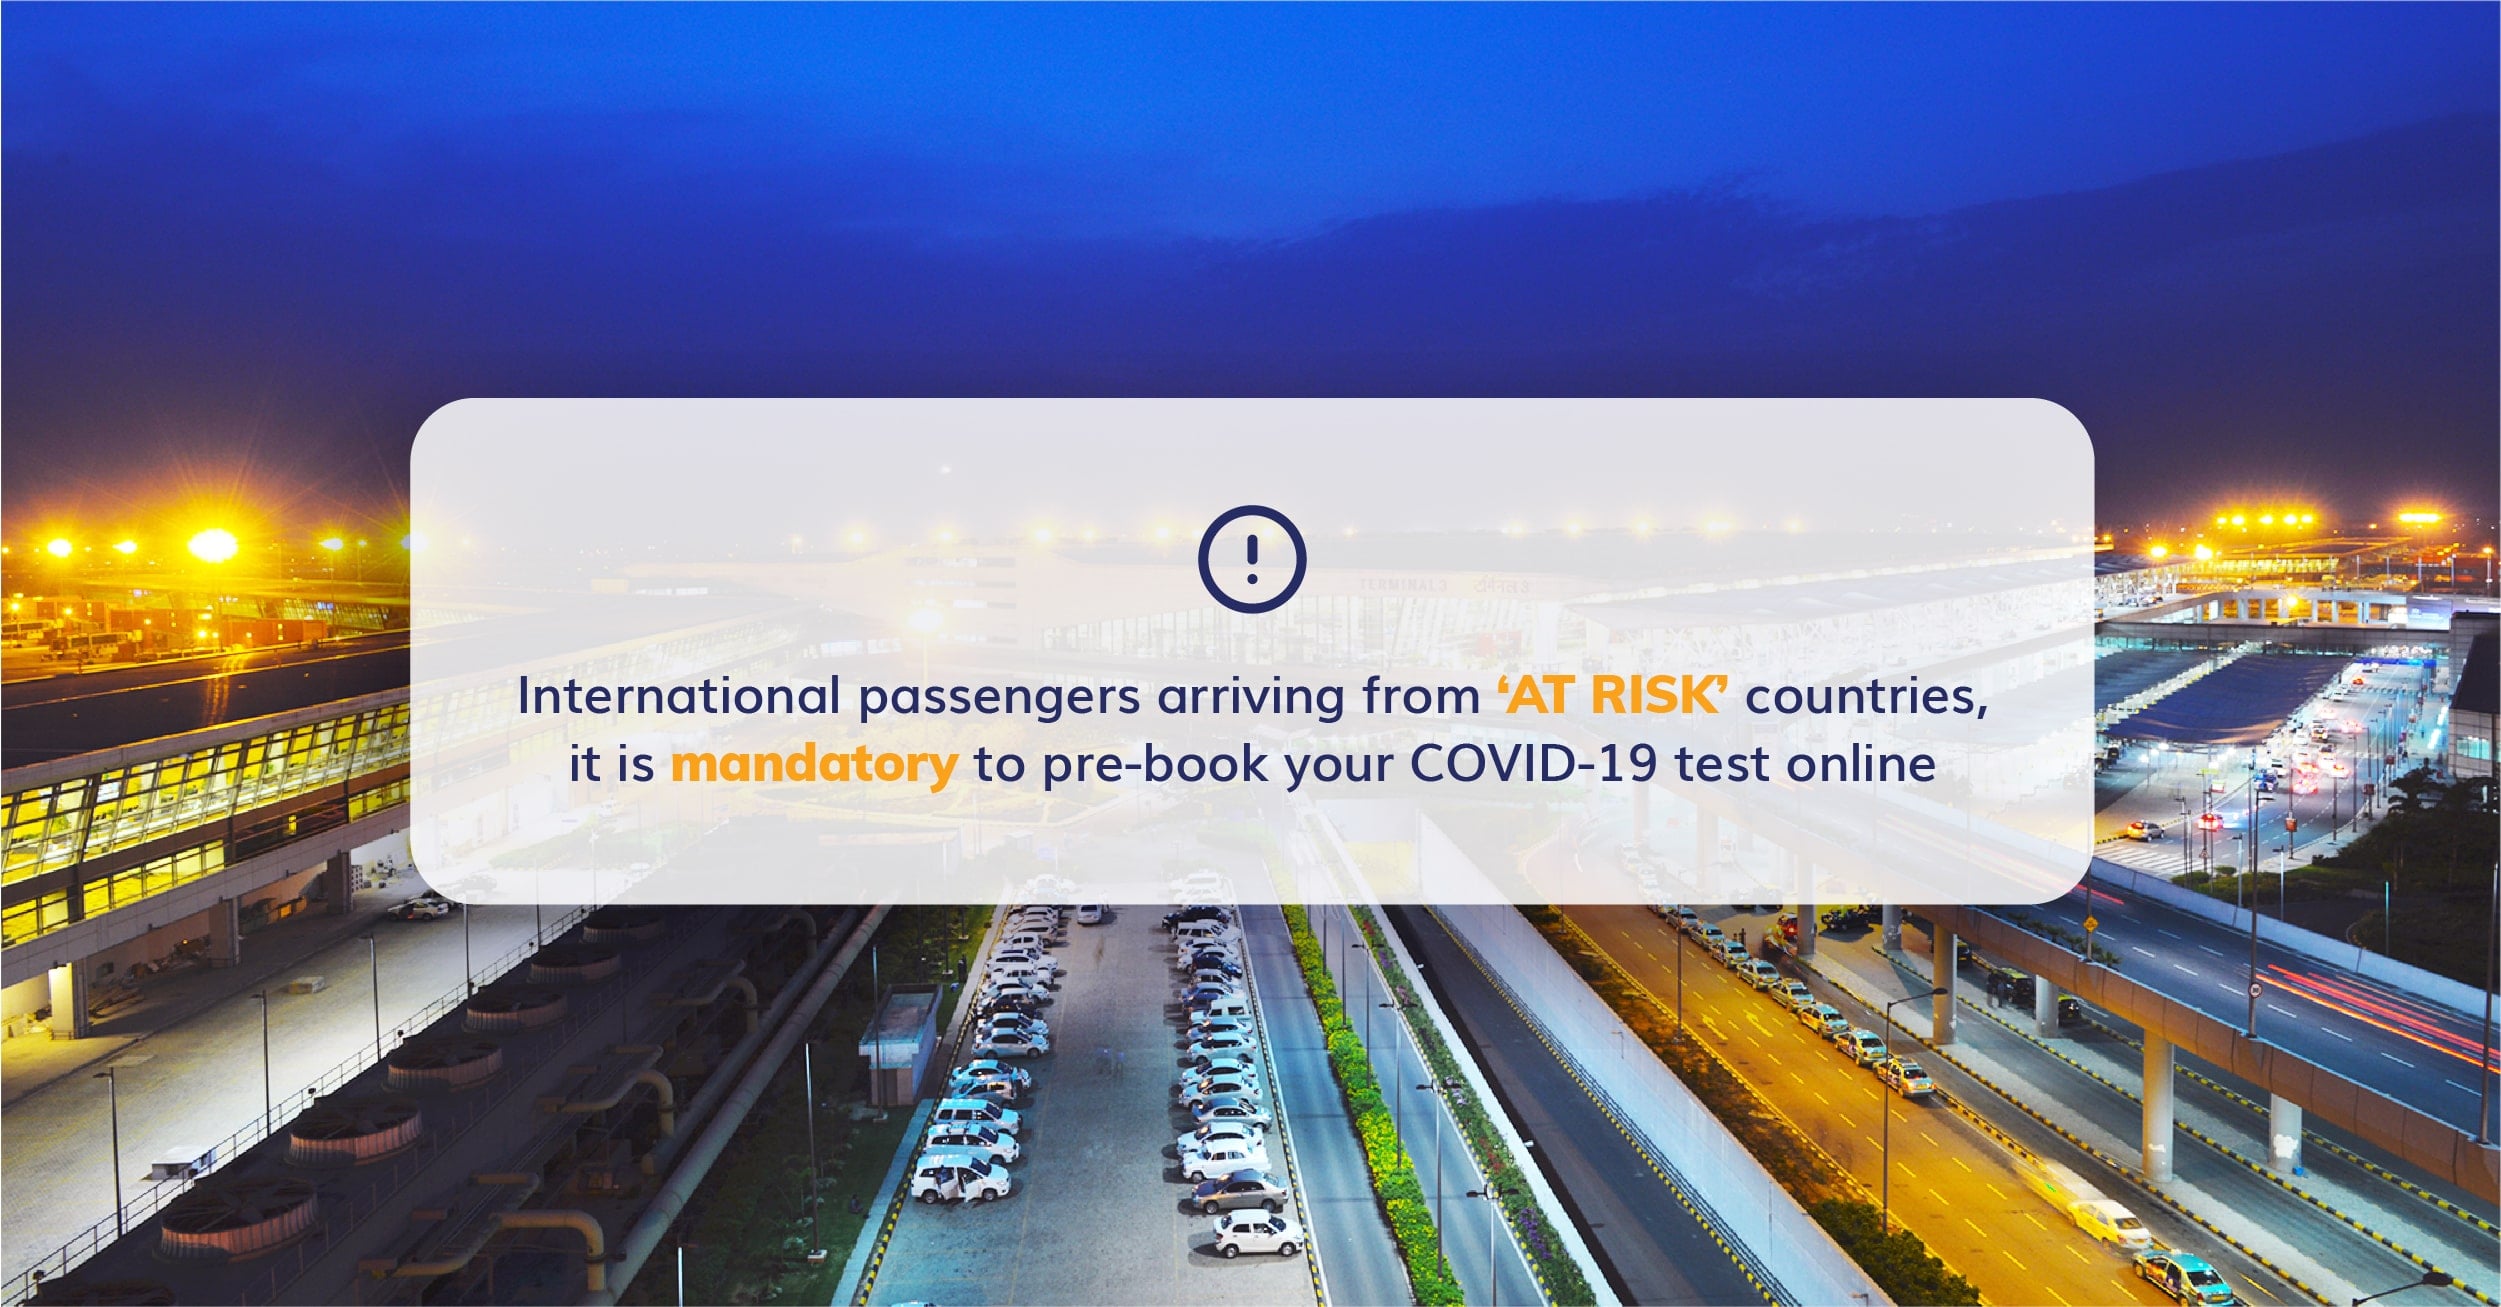 Latest travel guidelines for the International passengers arriving from ‘At RISK’ countries